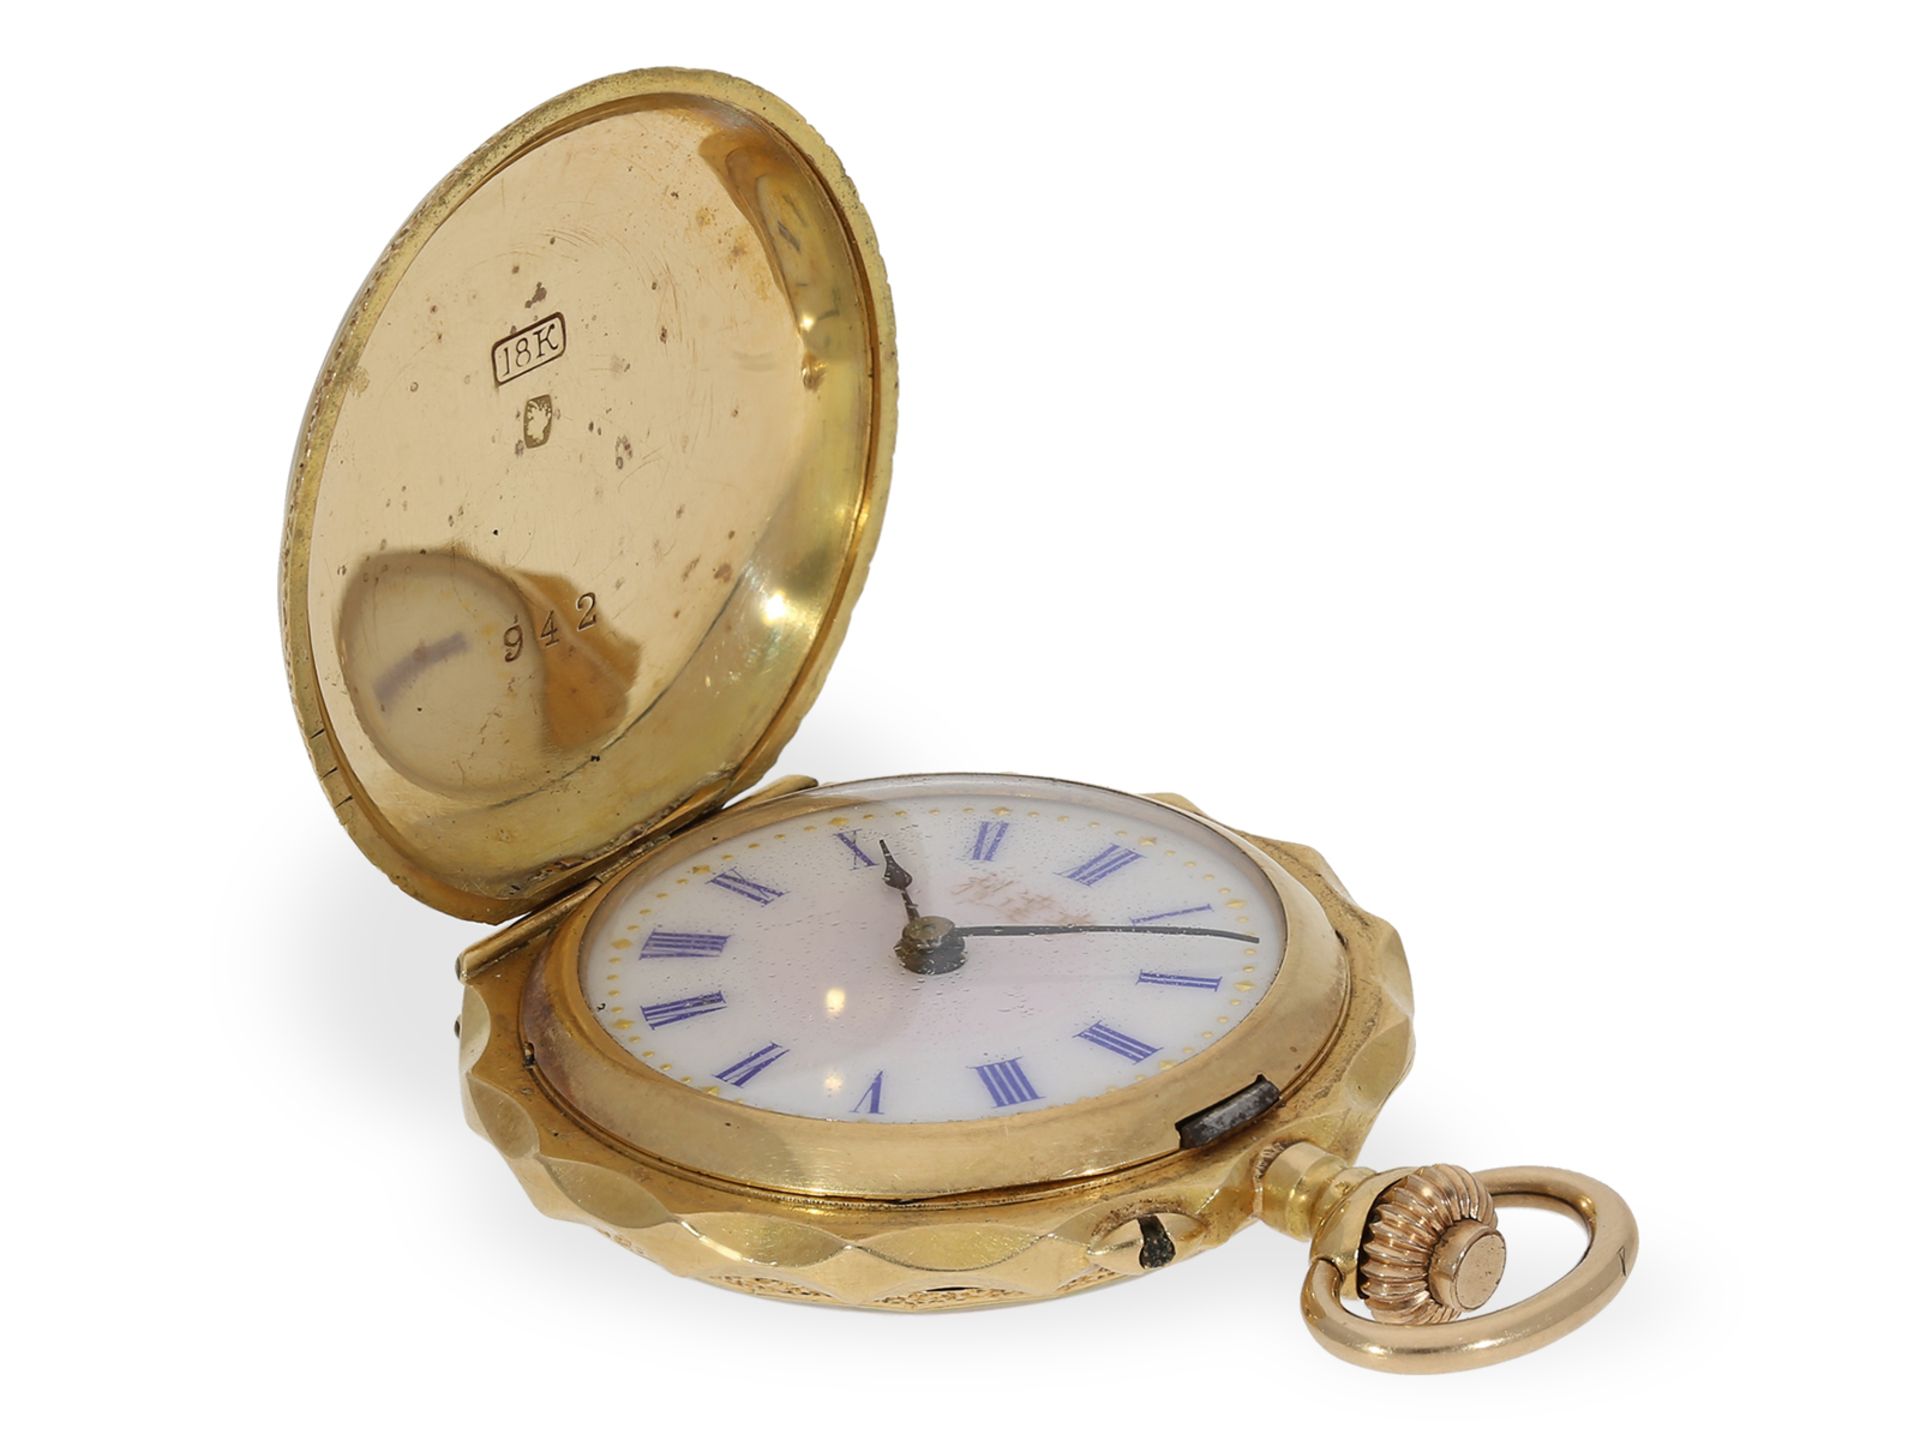 Pocket watch: extremely fine gold/enamel ladies' watch for the Chinese market, ca. 1900 - Image 6 of 6